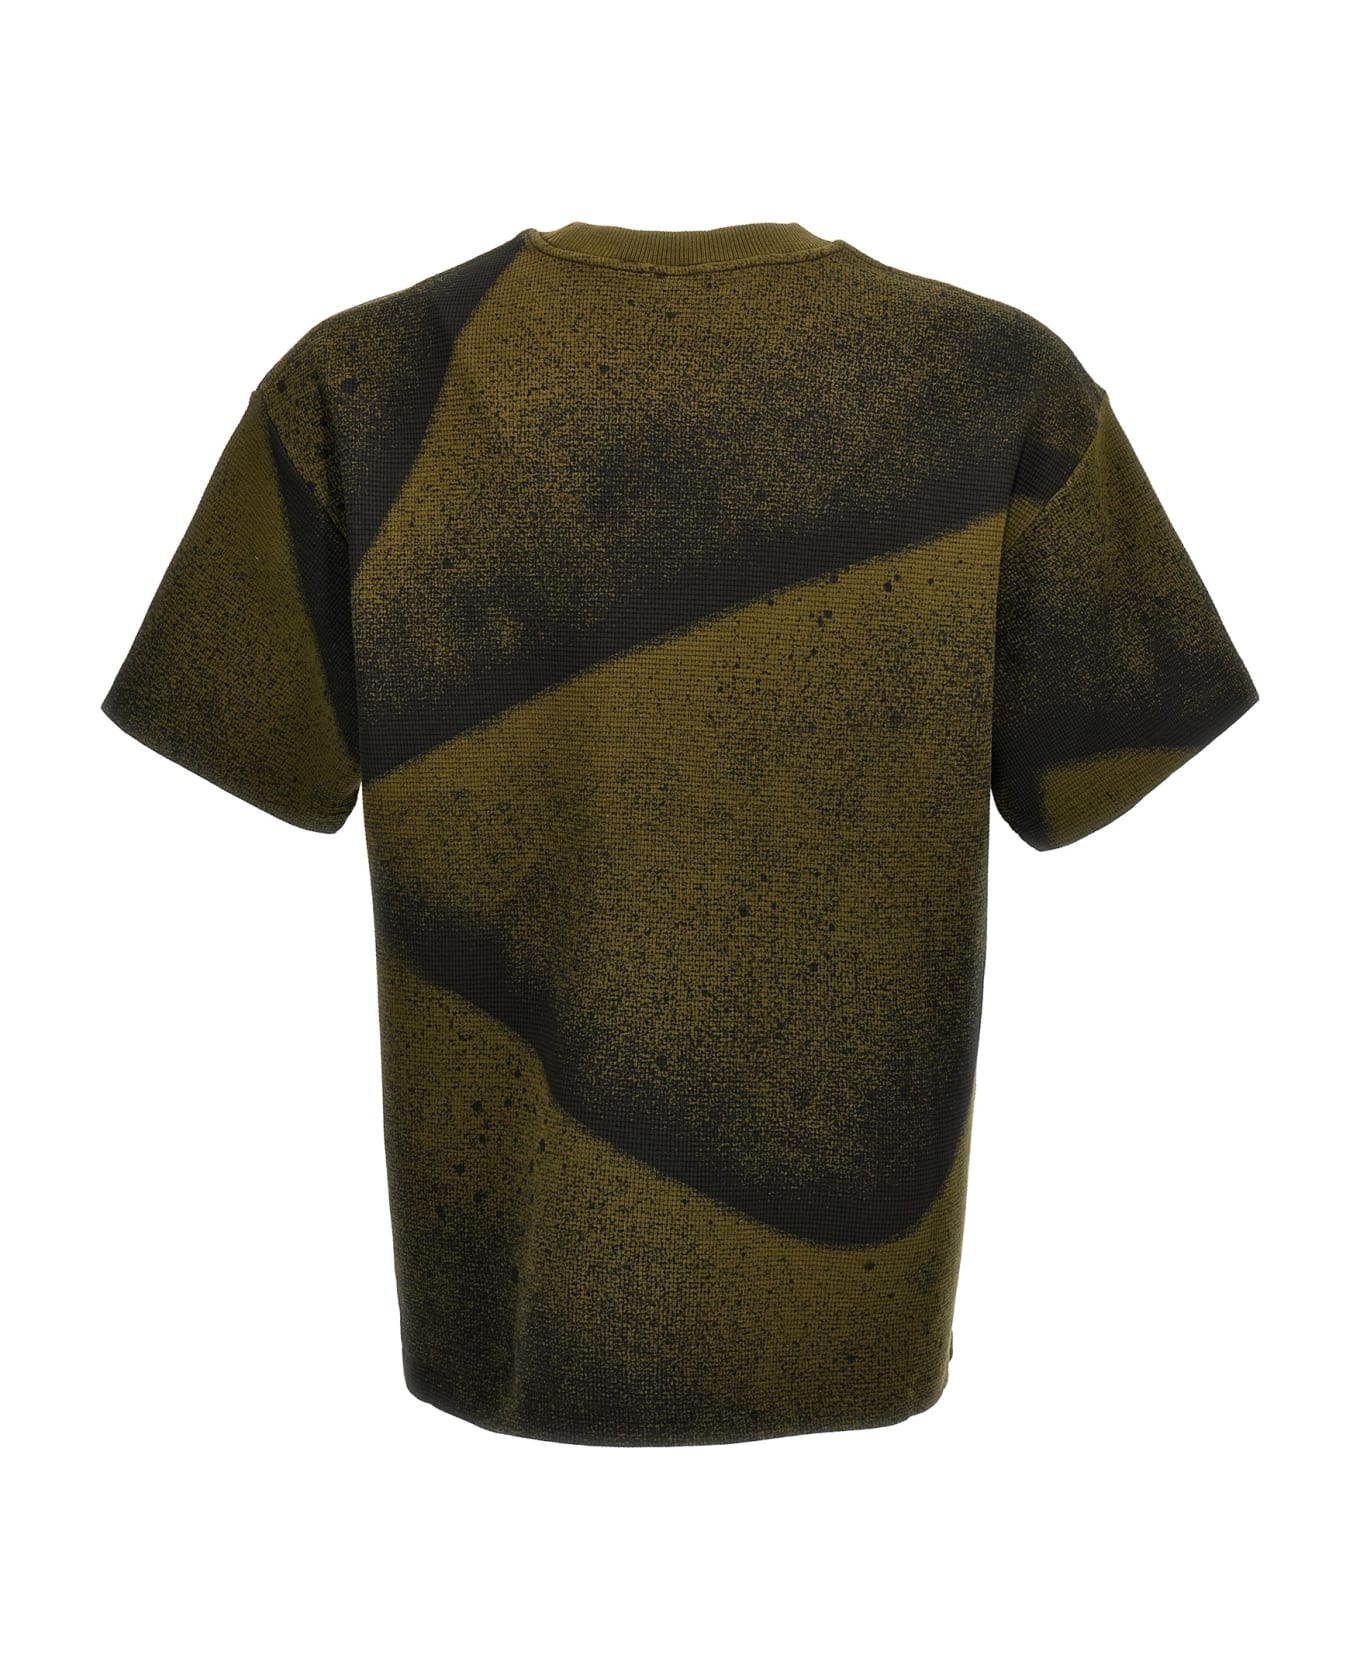 Objects Iv Life 'waffle' T-shirt - Green シャツ